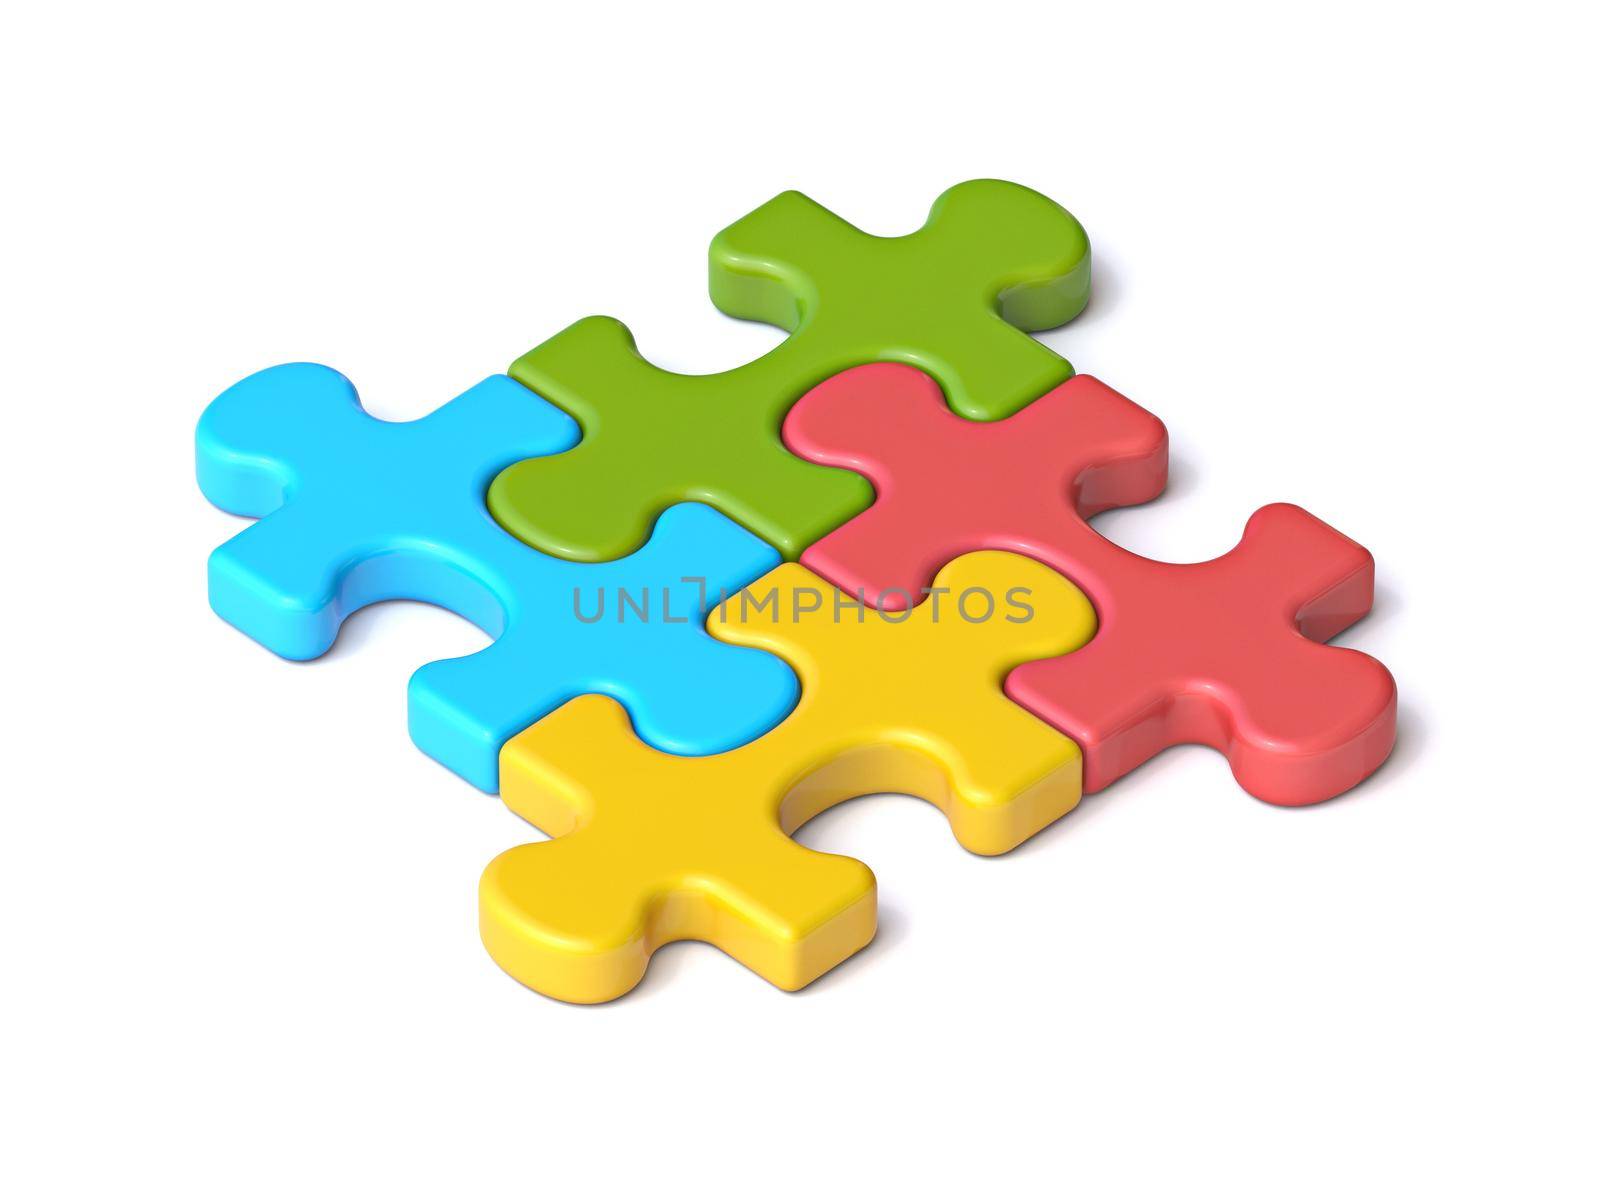 Four puzzle pieces 3D rendering illustration isolated on white background